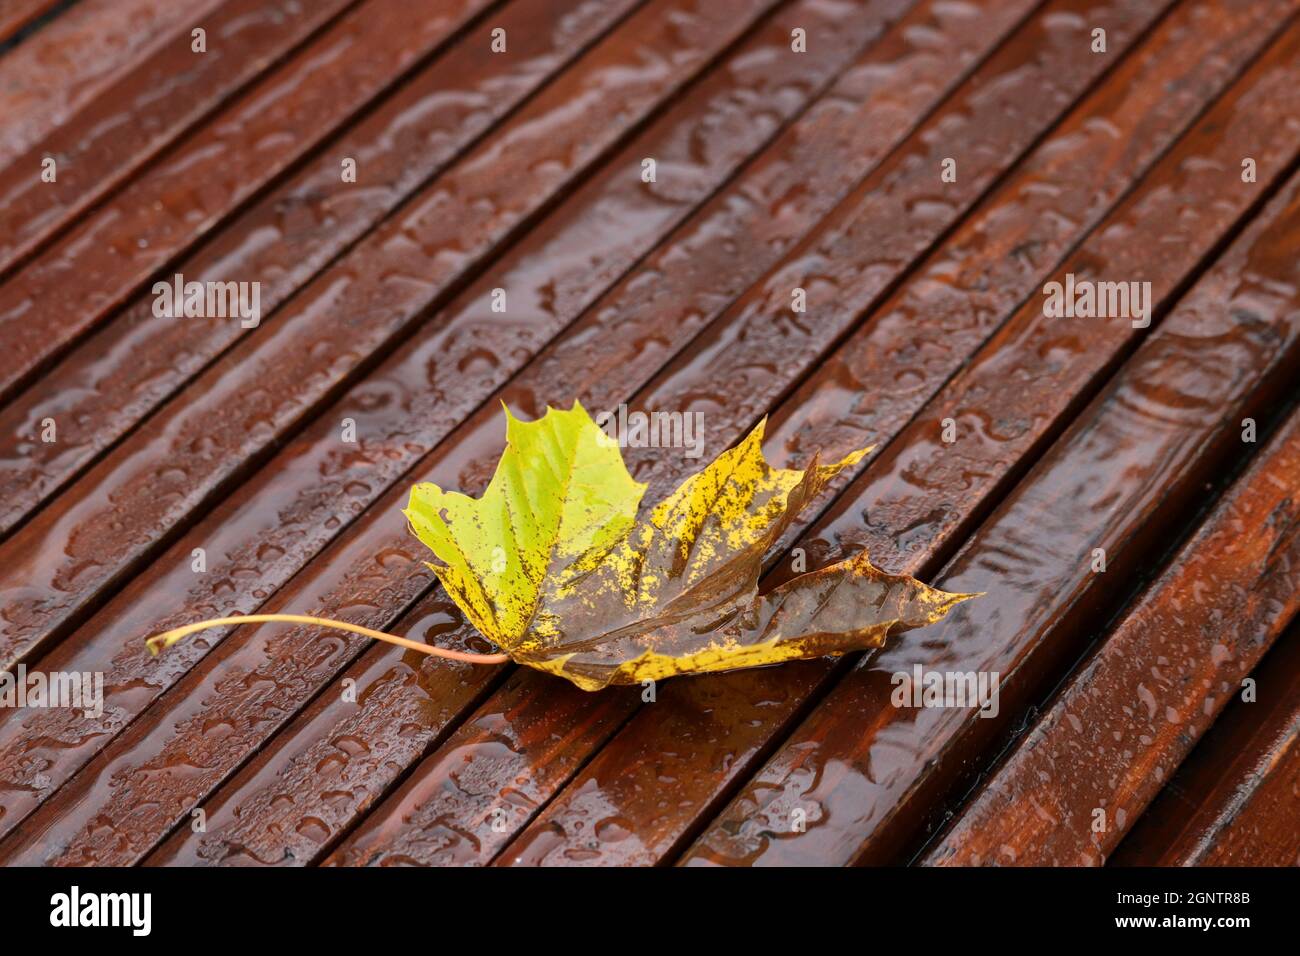 Rain at autumn, fallen maple leaf on a wet wooden bench in the park Stock Photo